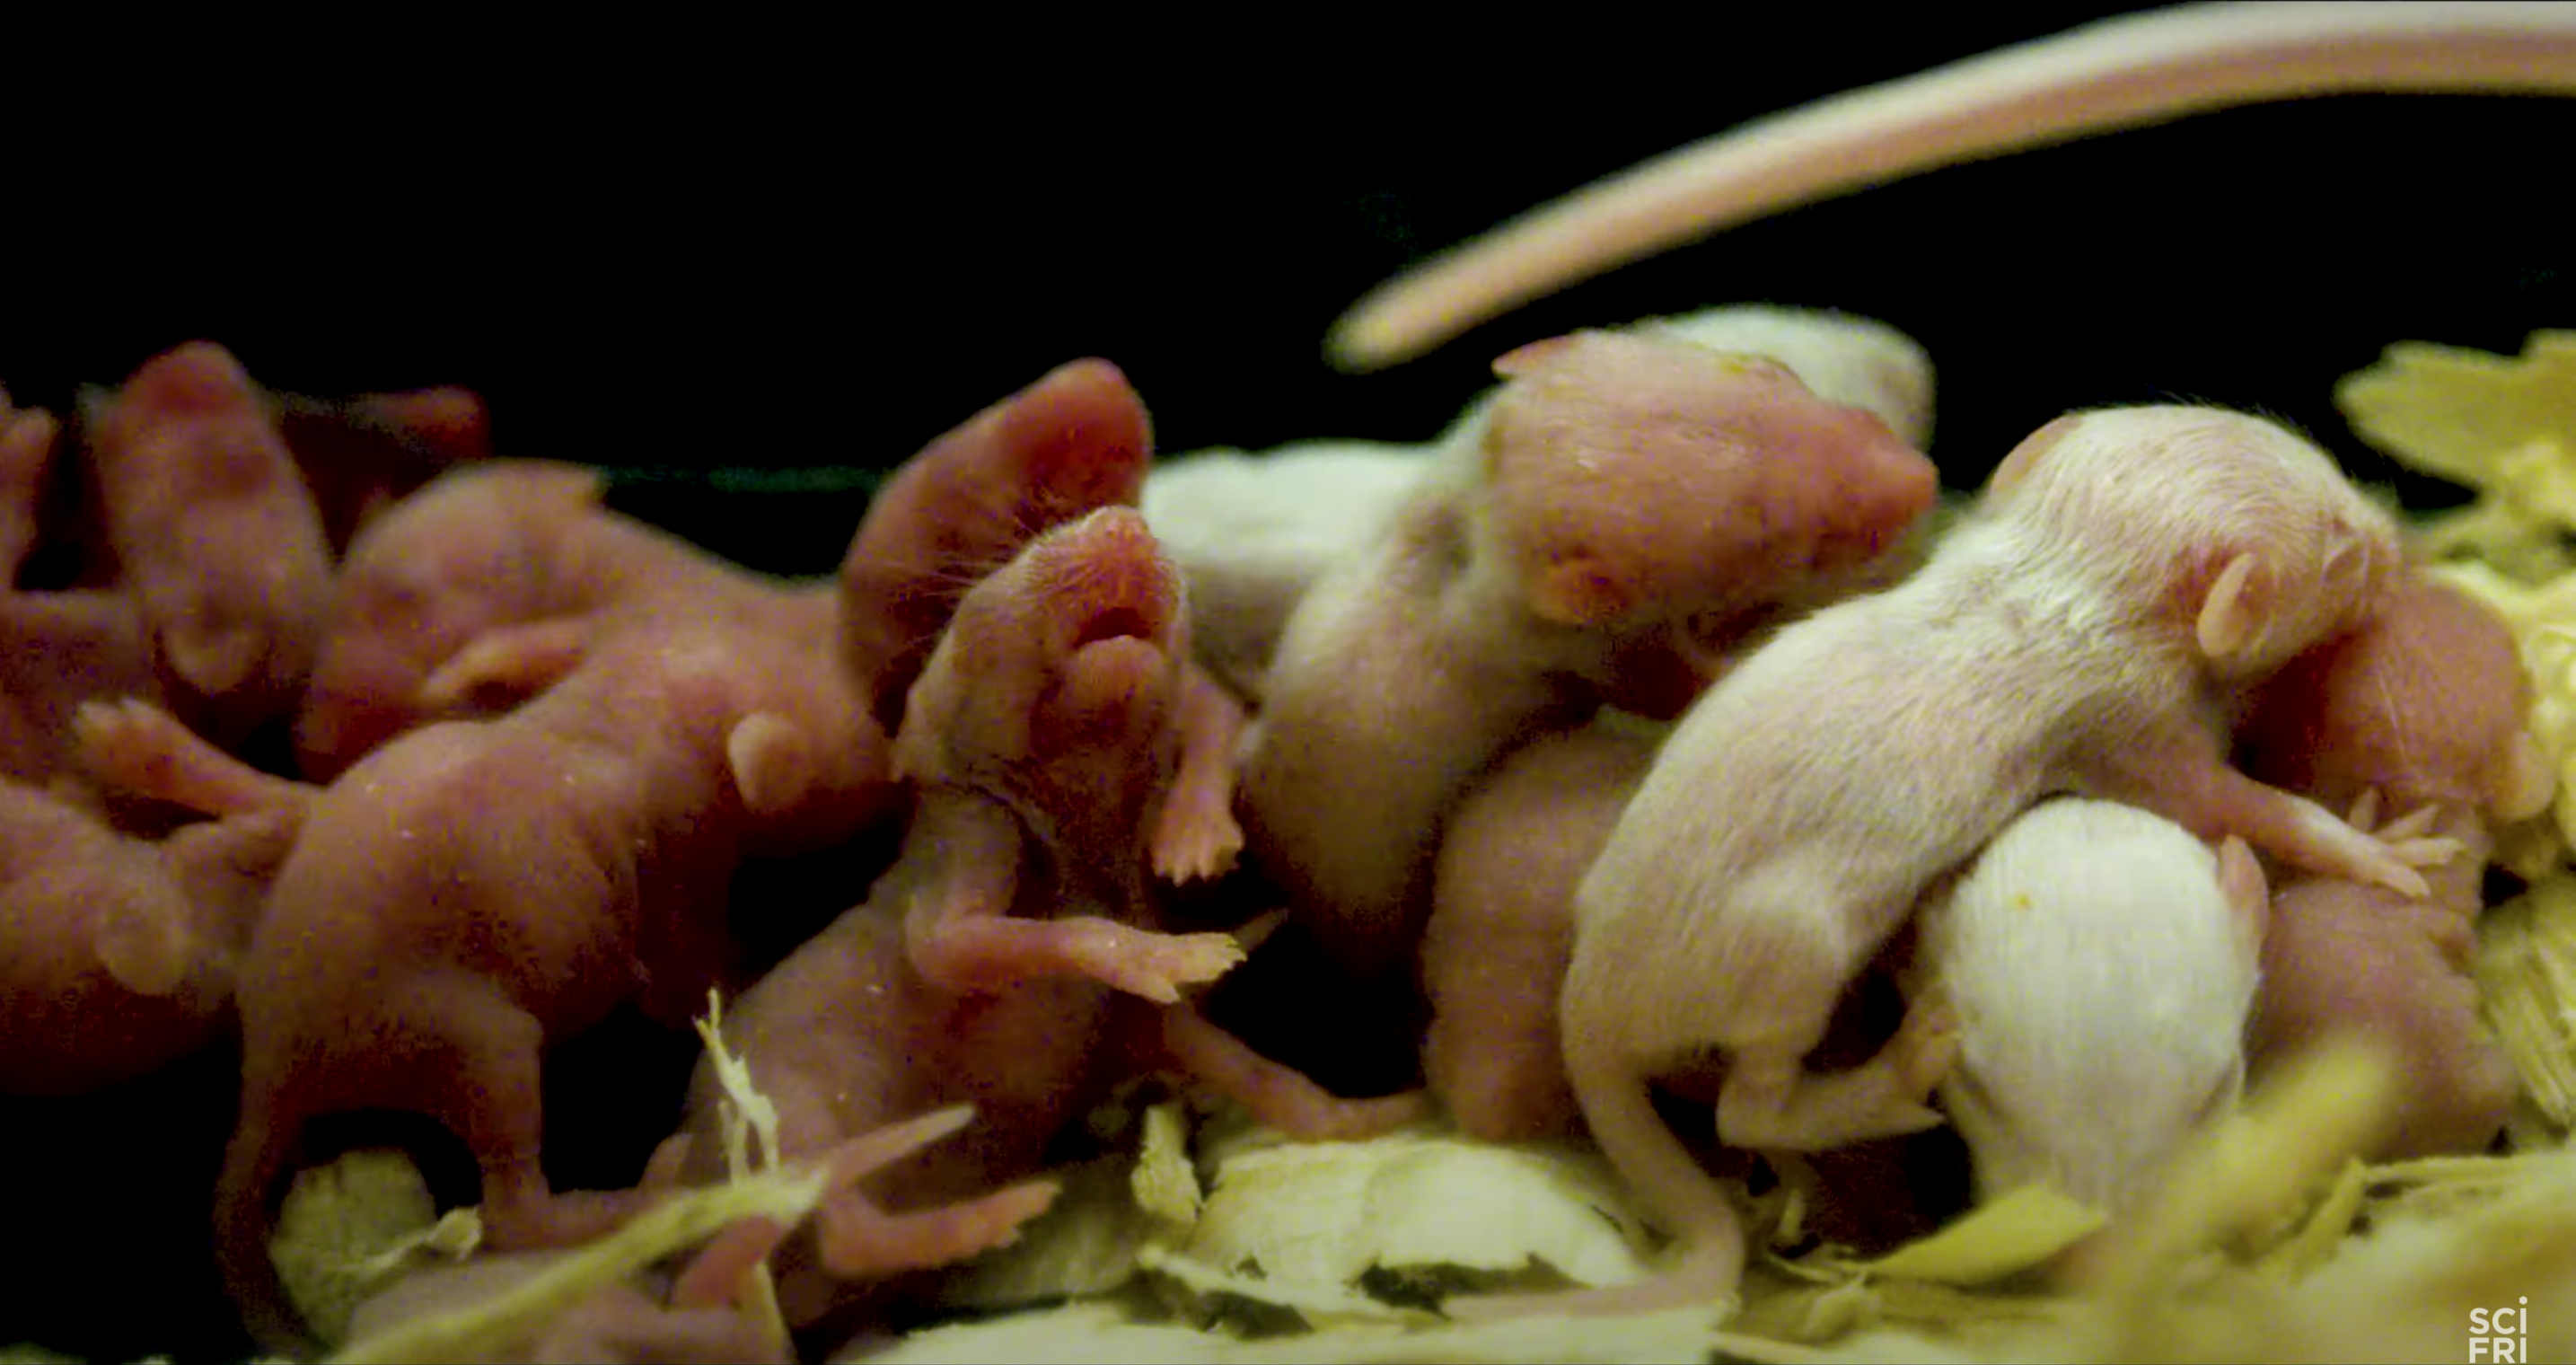 A litter of mouse pups